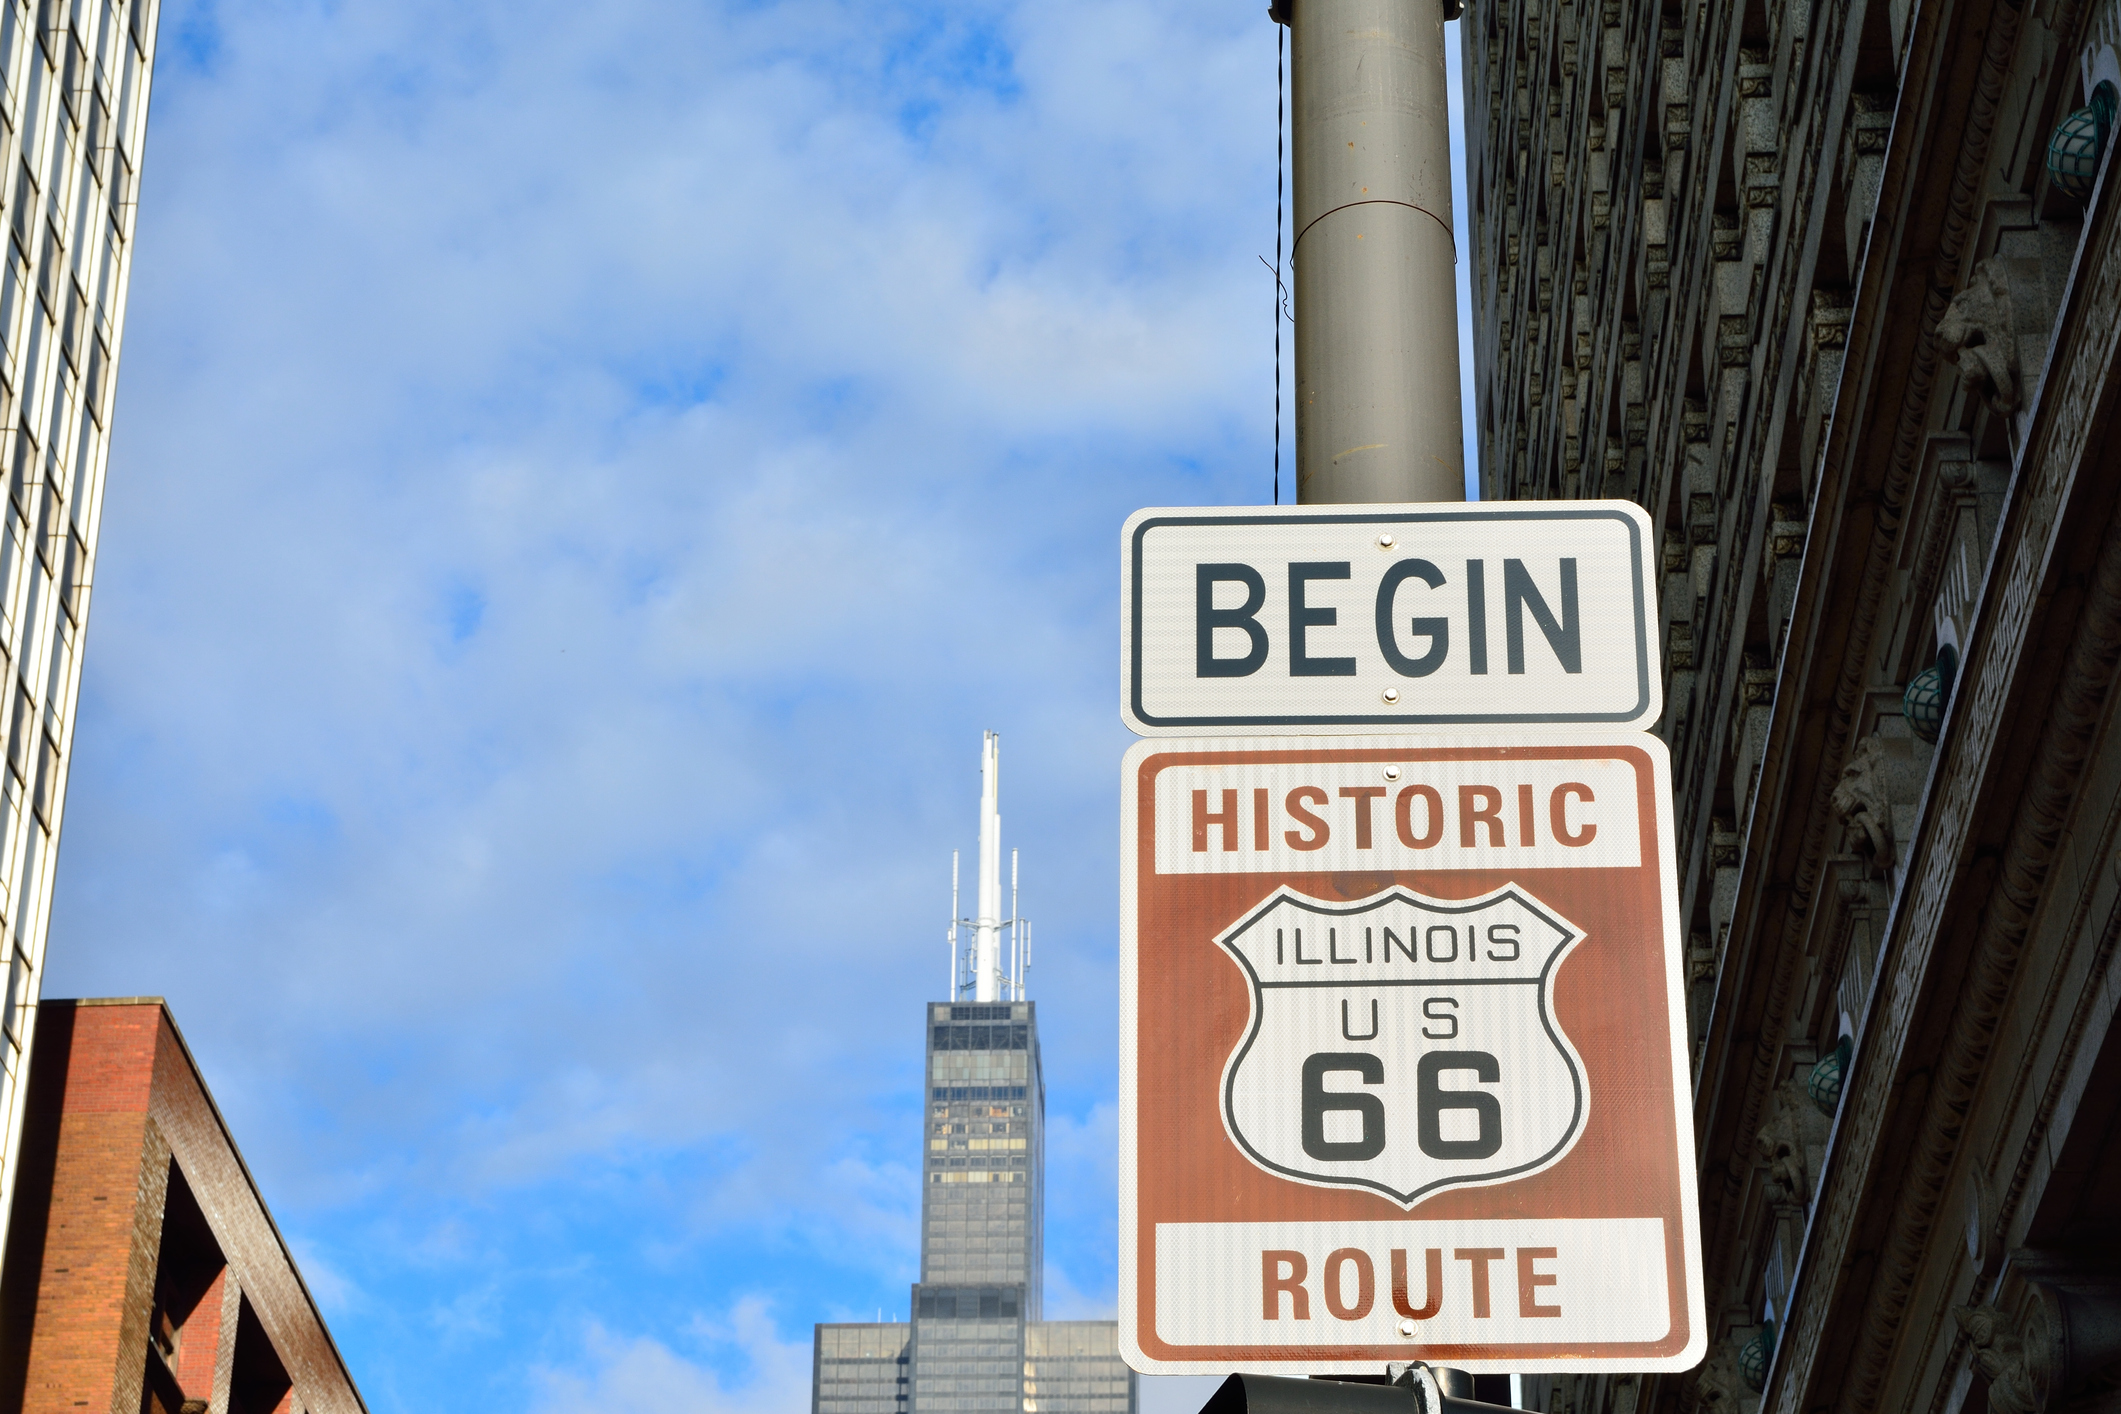 BLACK FRIDAY OFFER: Route 66 Fly Drive From Chicago to Los Angeles!!!